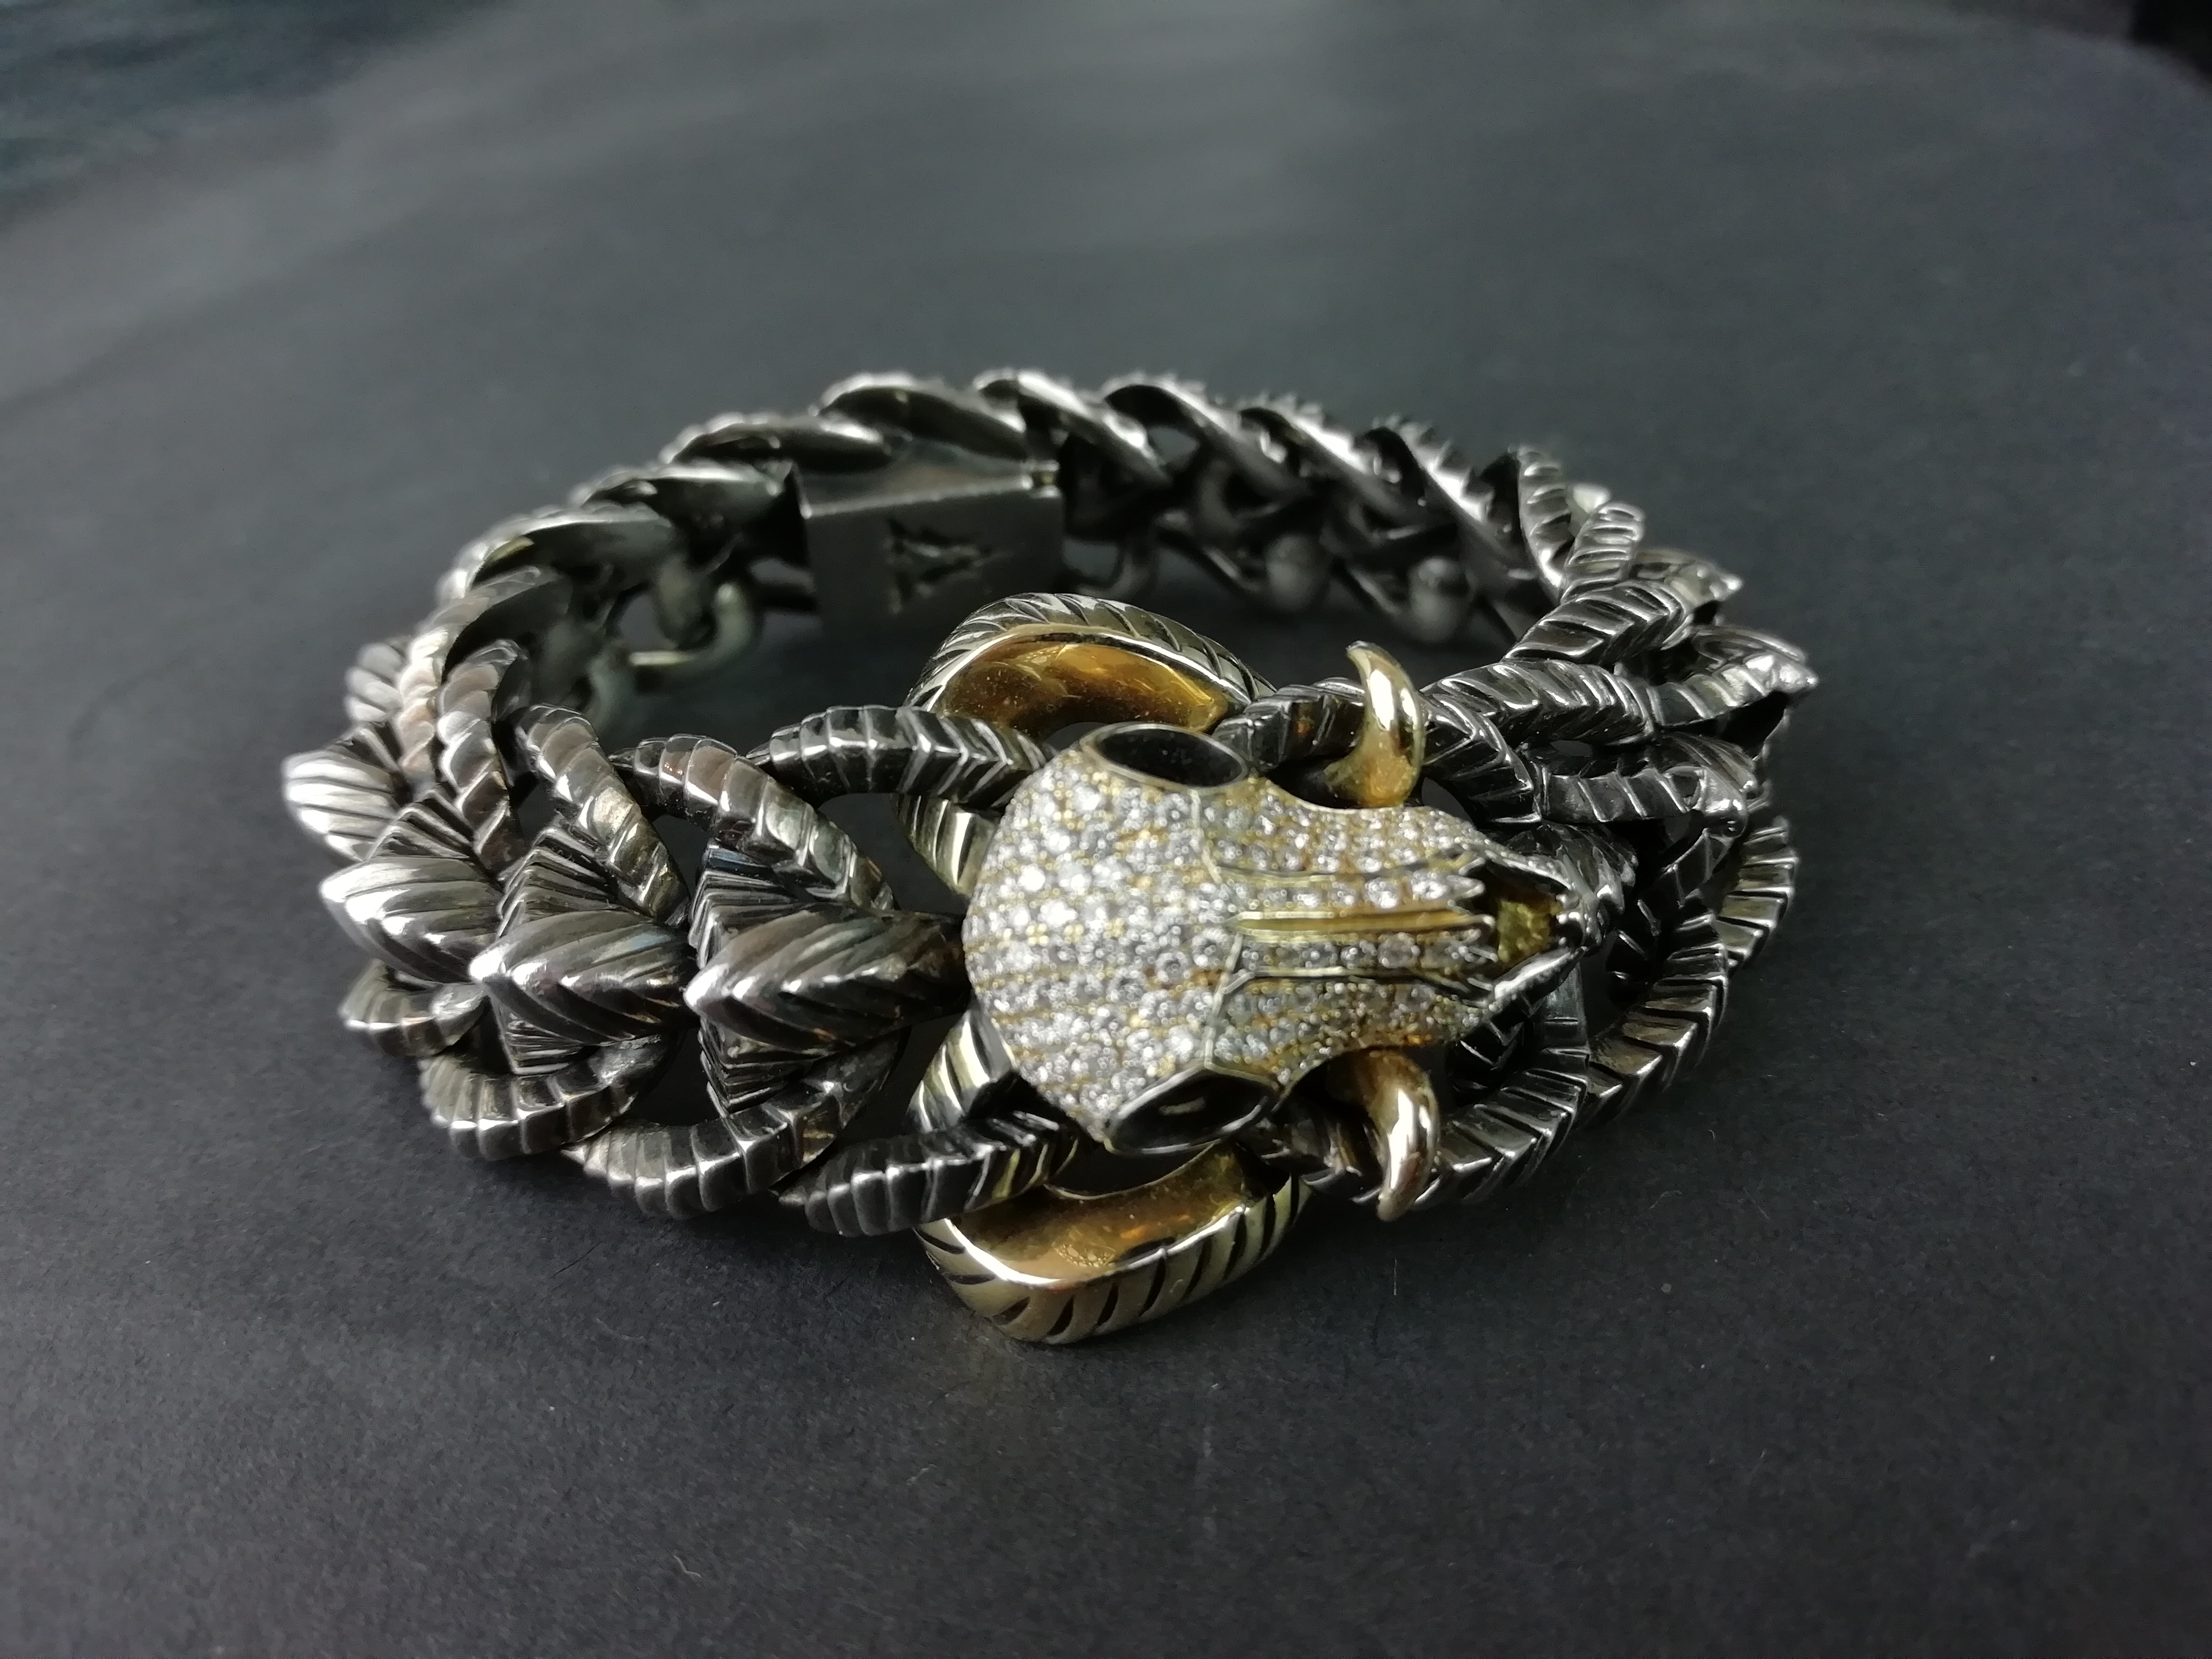 STEPHEN WEBSTER THORN COLLECTION RAMS HEAD BRACELET, 18ct yellow gold diamond set rams head, - Image 2 of 5